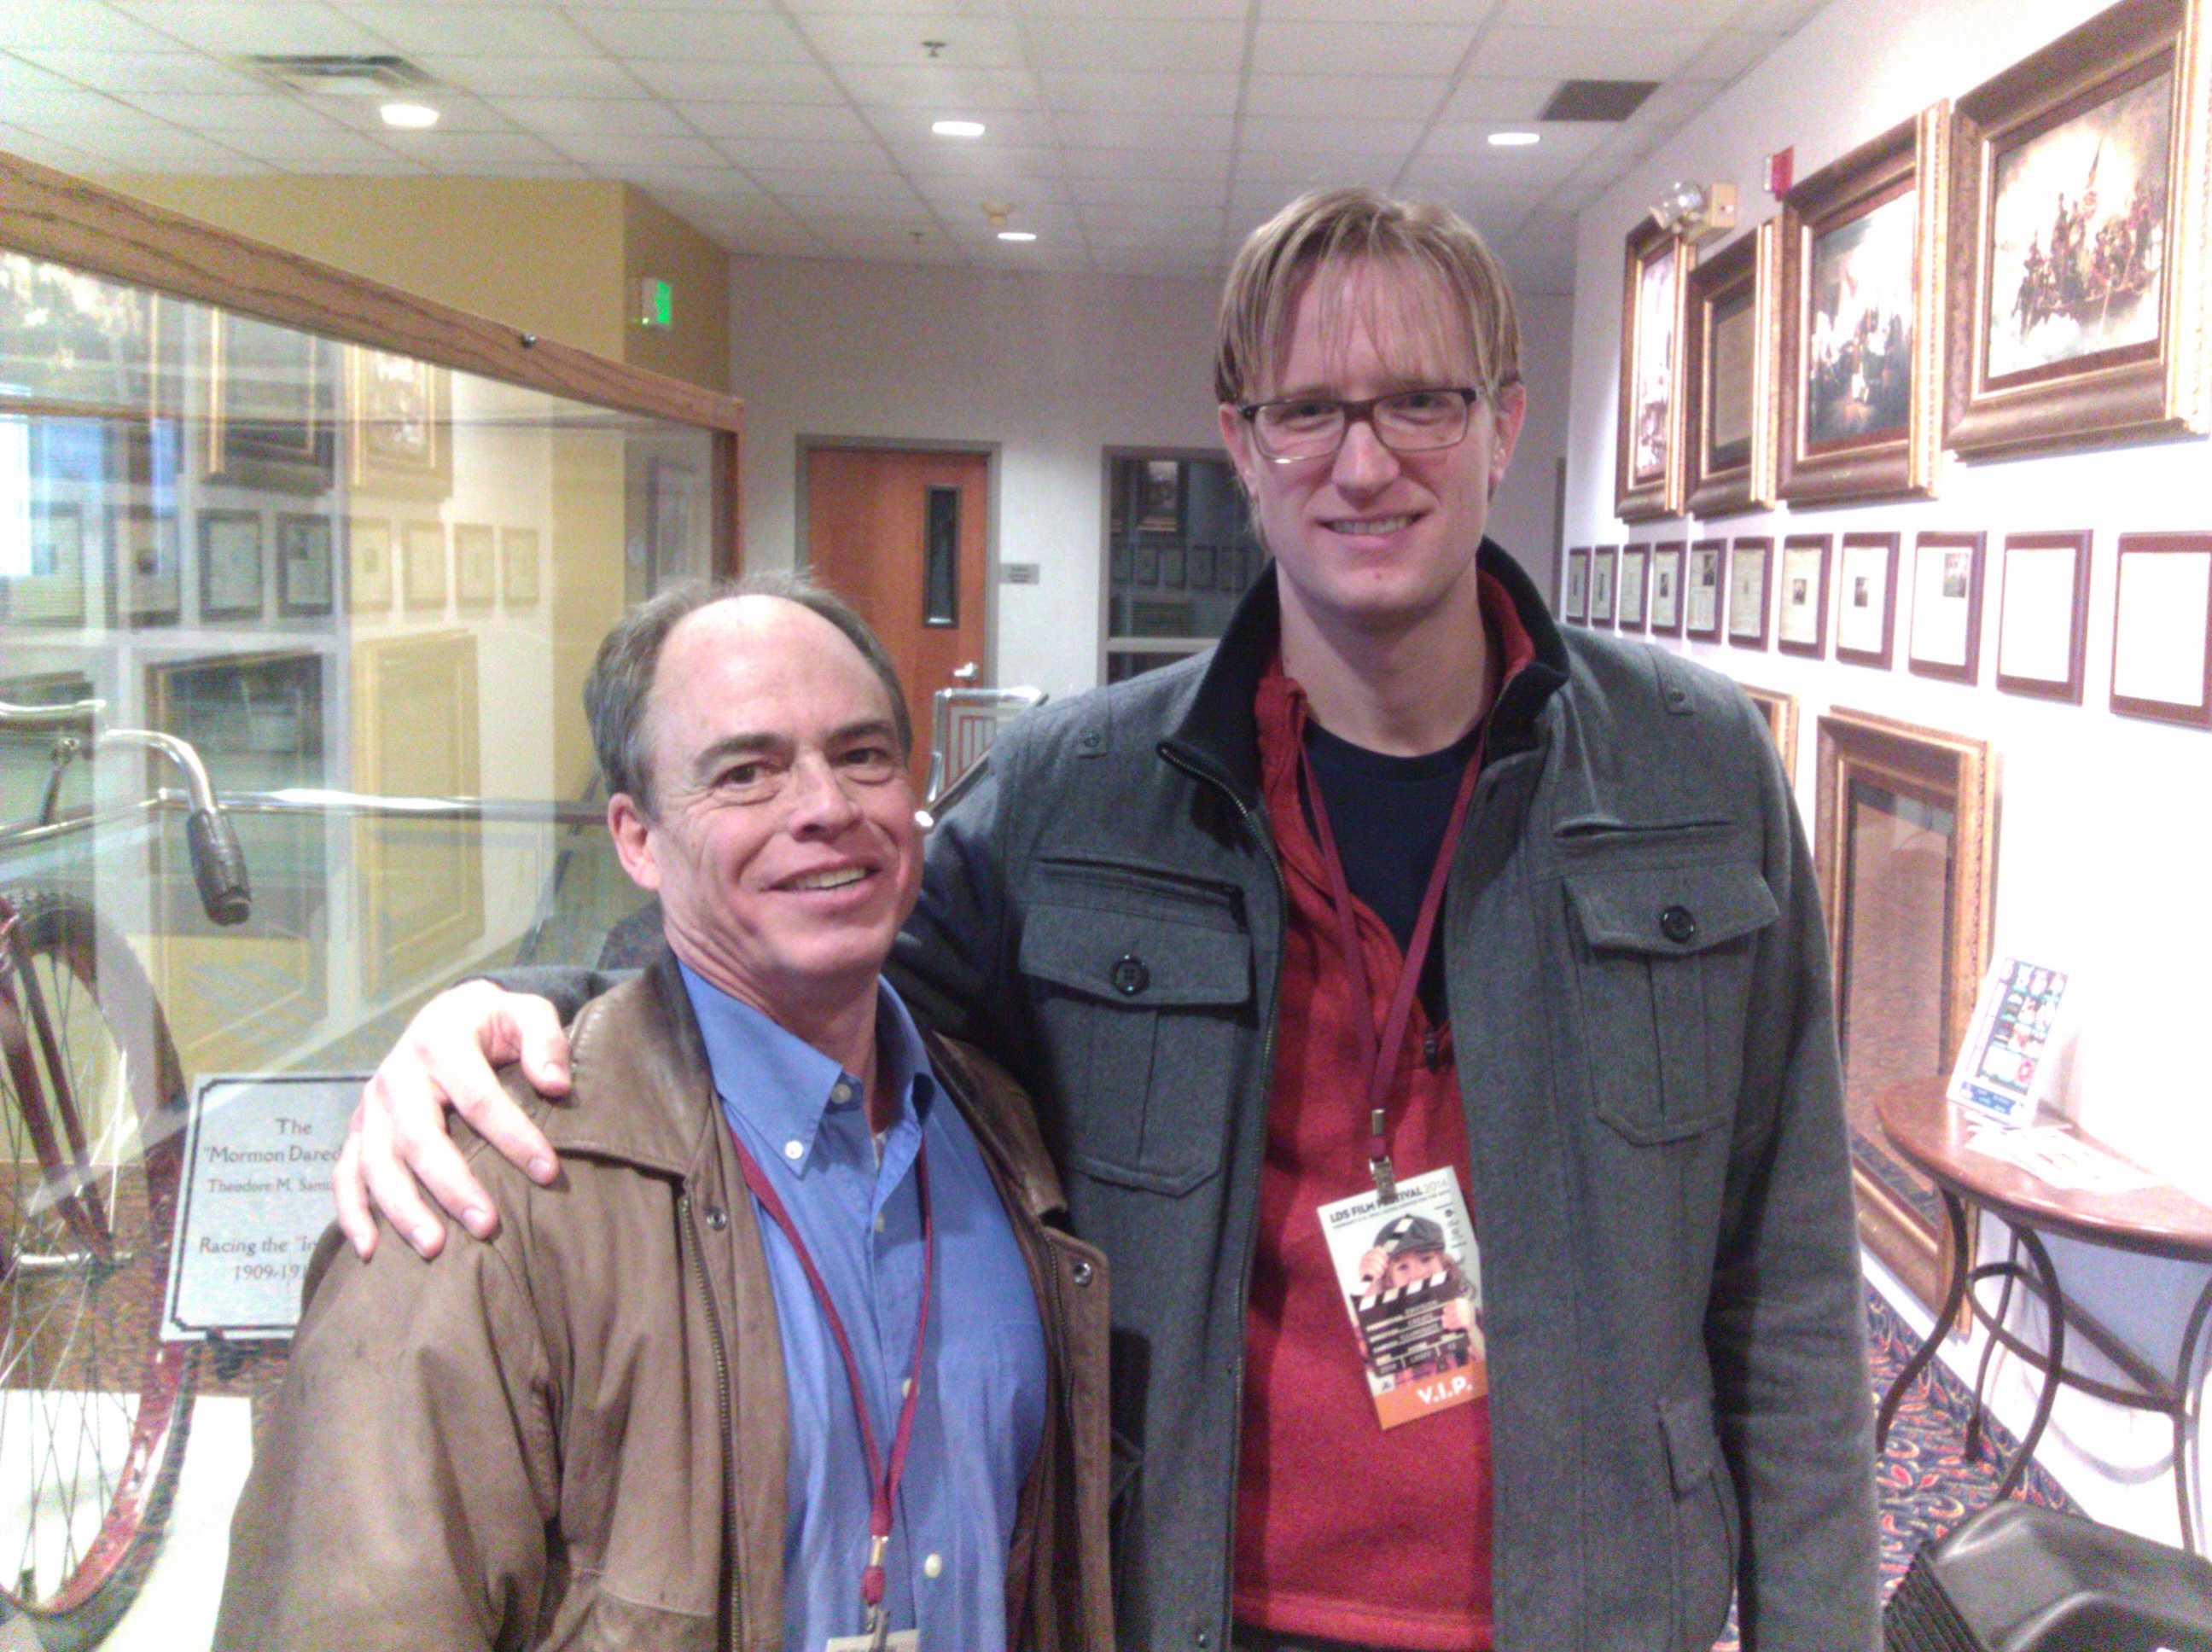 Actor Dave Bresnahan with screen writer JD Payne, currently drafting Star Trek III.